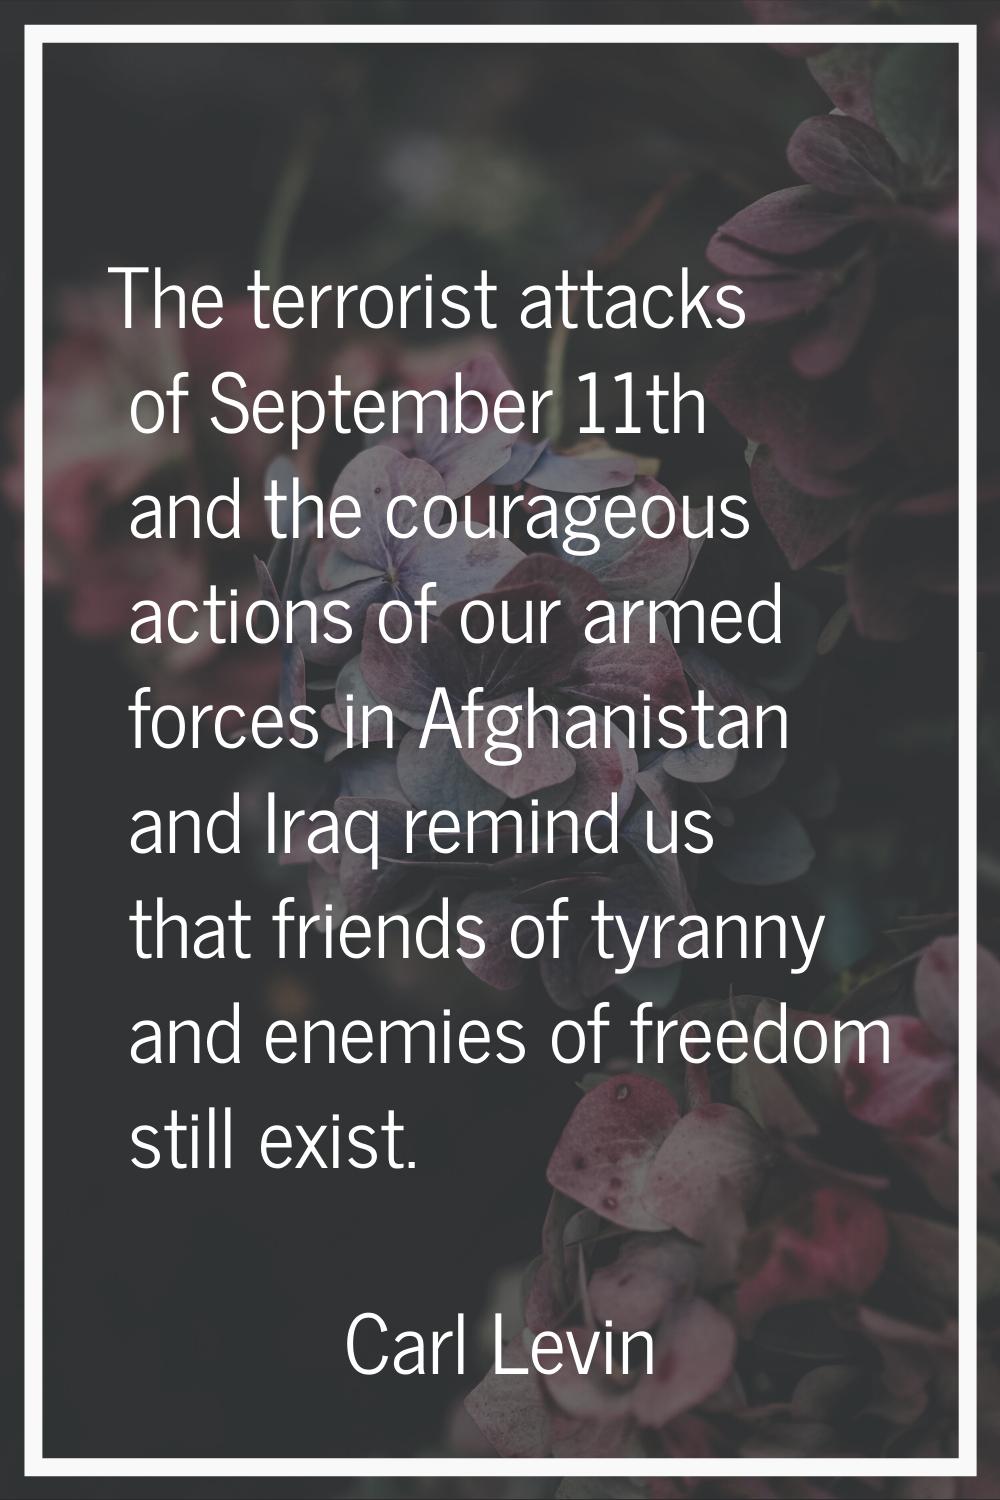 The terrorist attacks of September 11th and the courageous actions of our armed forces in Afghanist